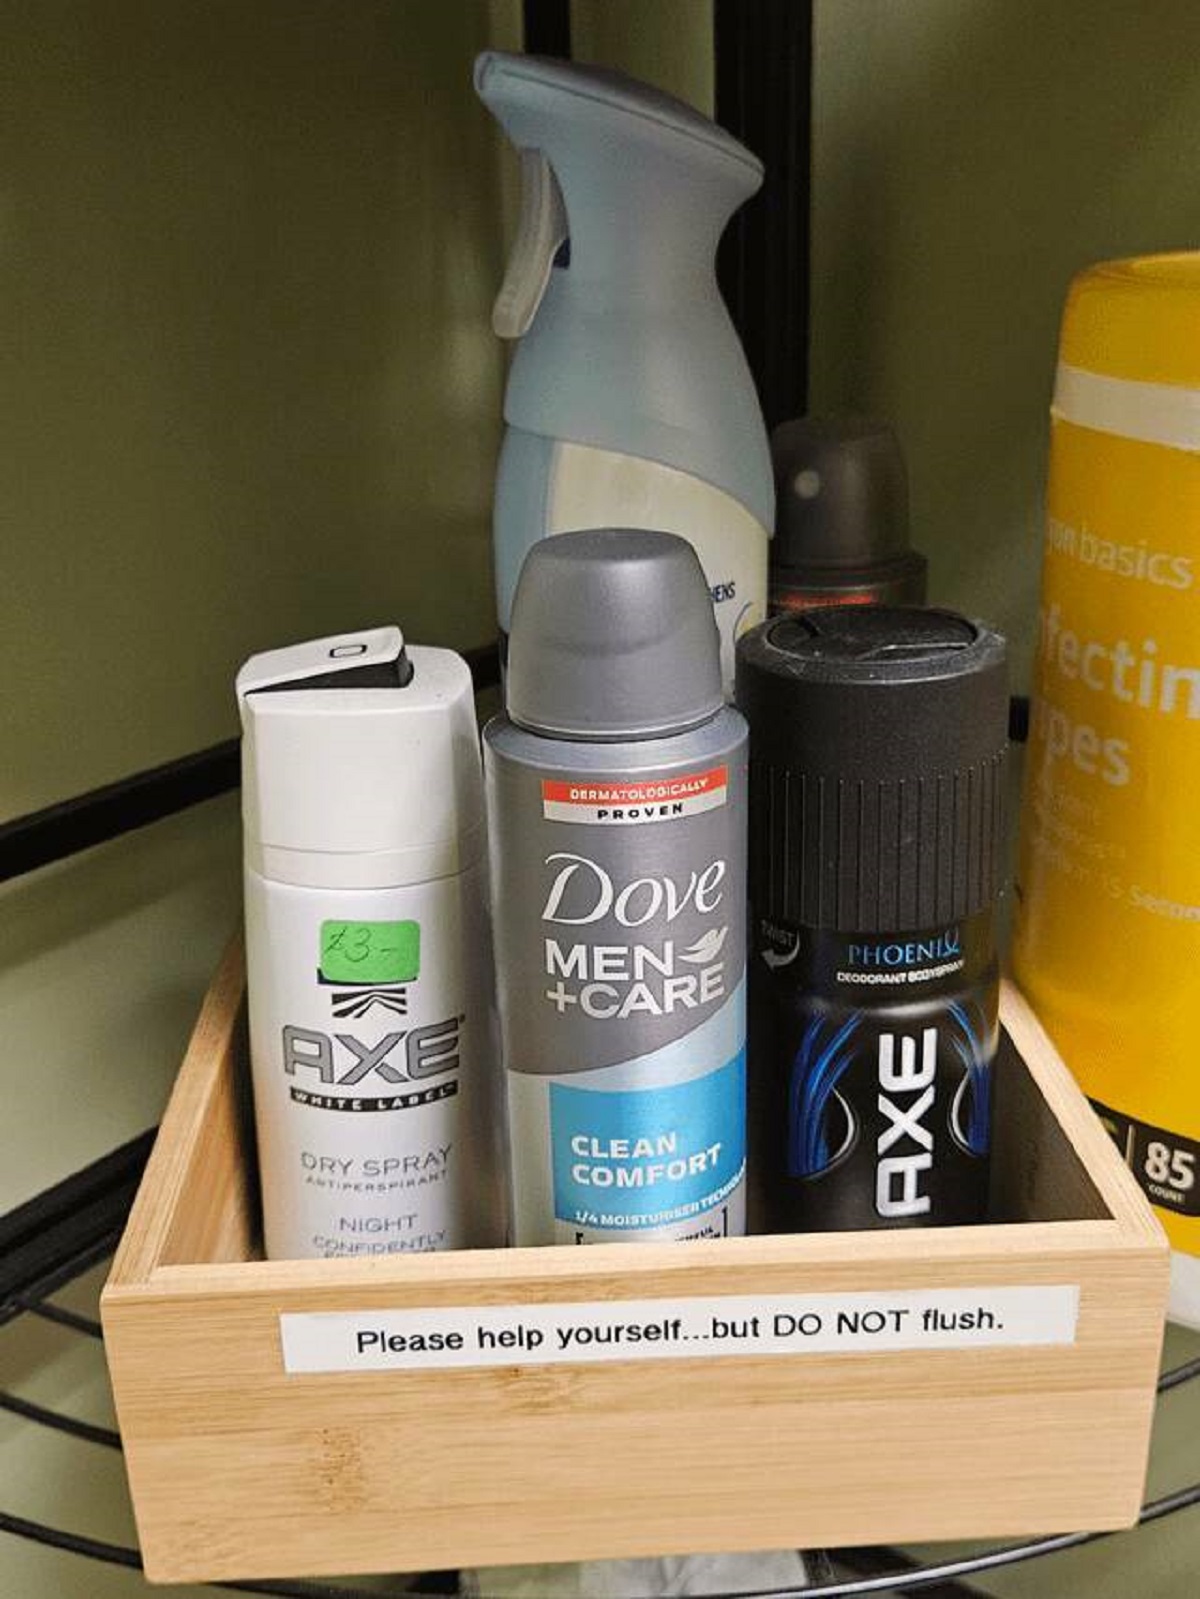 "The game store that I go to has free deodorant in the bathroom for the gamers"